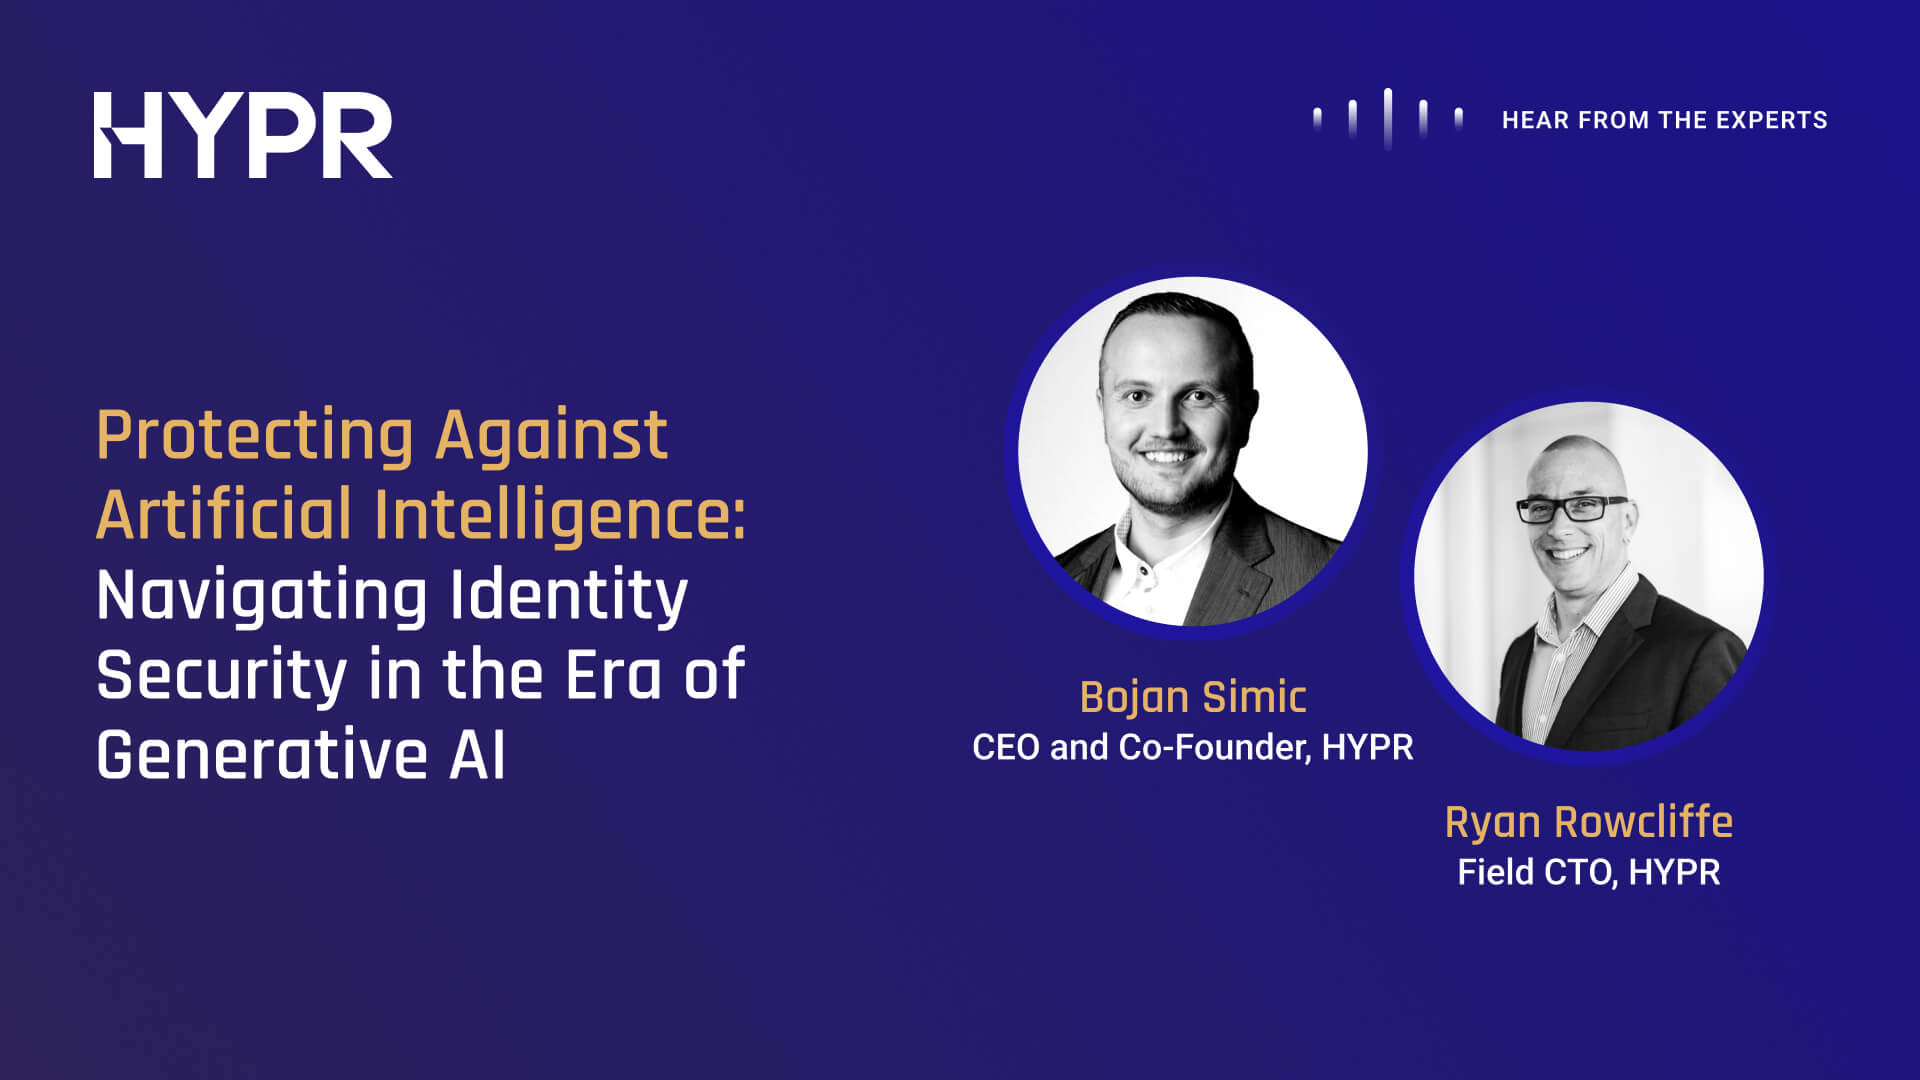 Protecting Against AI: Navigating Identity Security in Era of Generative AI